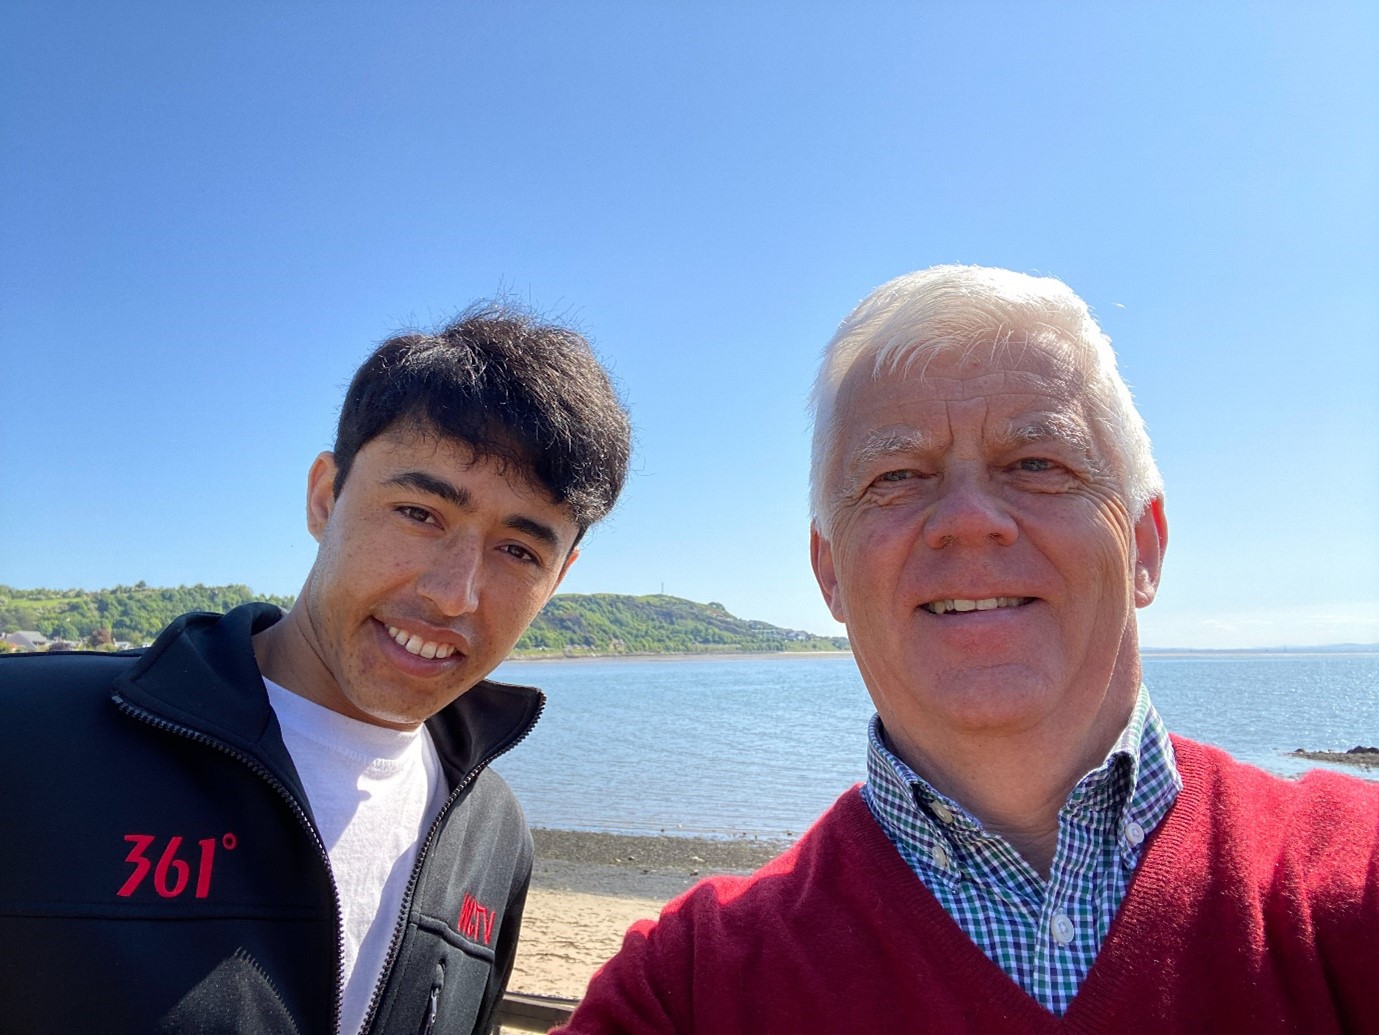 Two people standing side by side taking a selfie by the beach